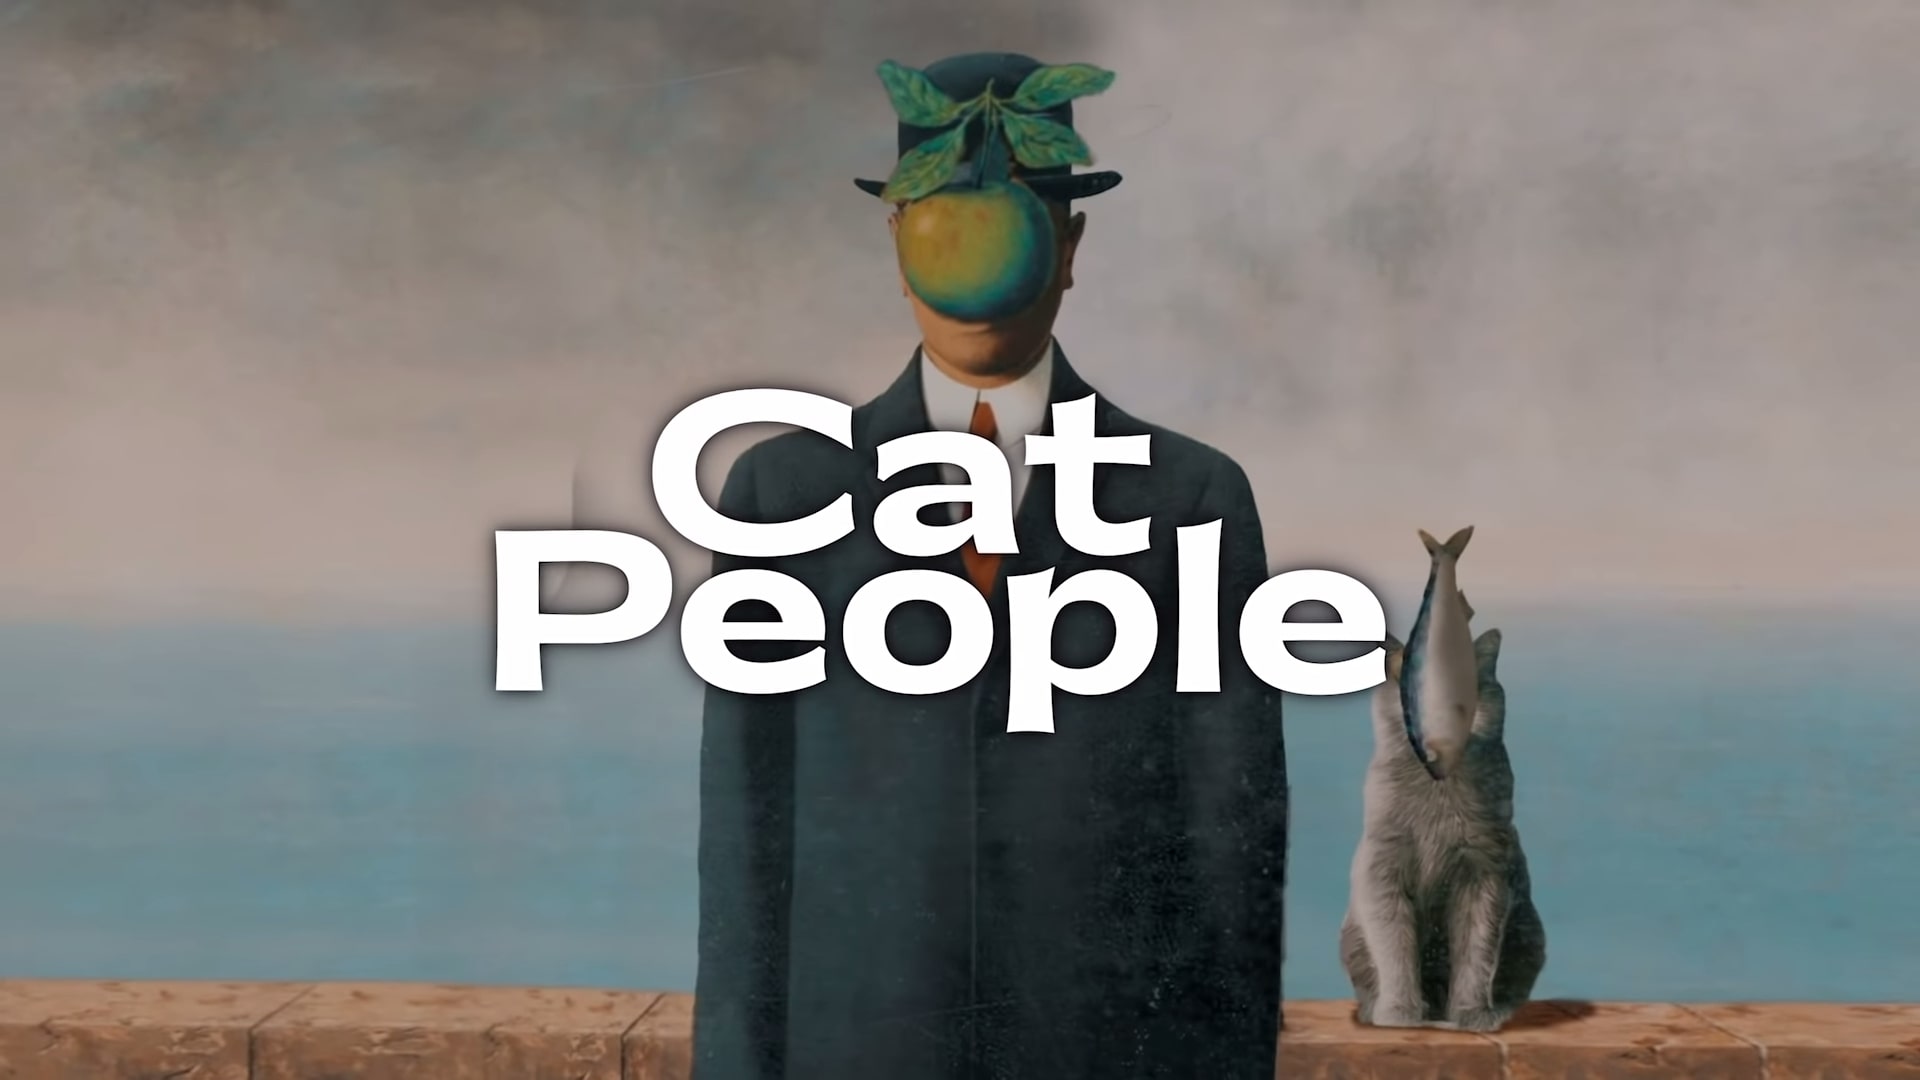 Cat People Official Trailer Netflix, Coming to Netflix in July 2021